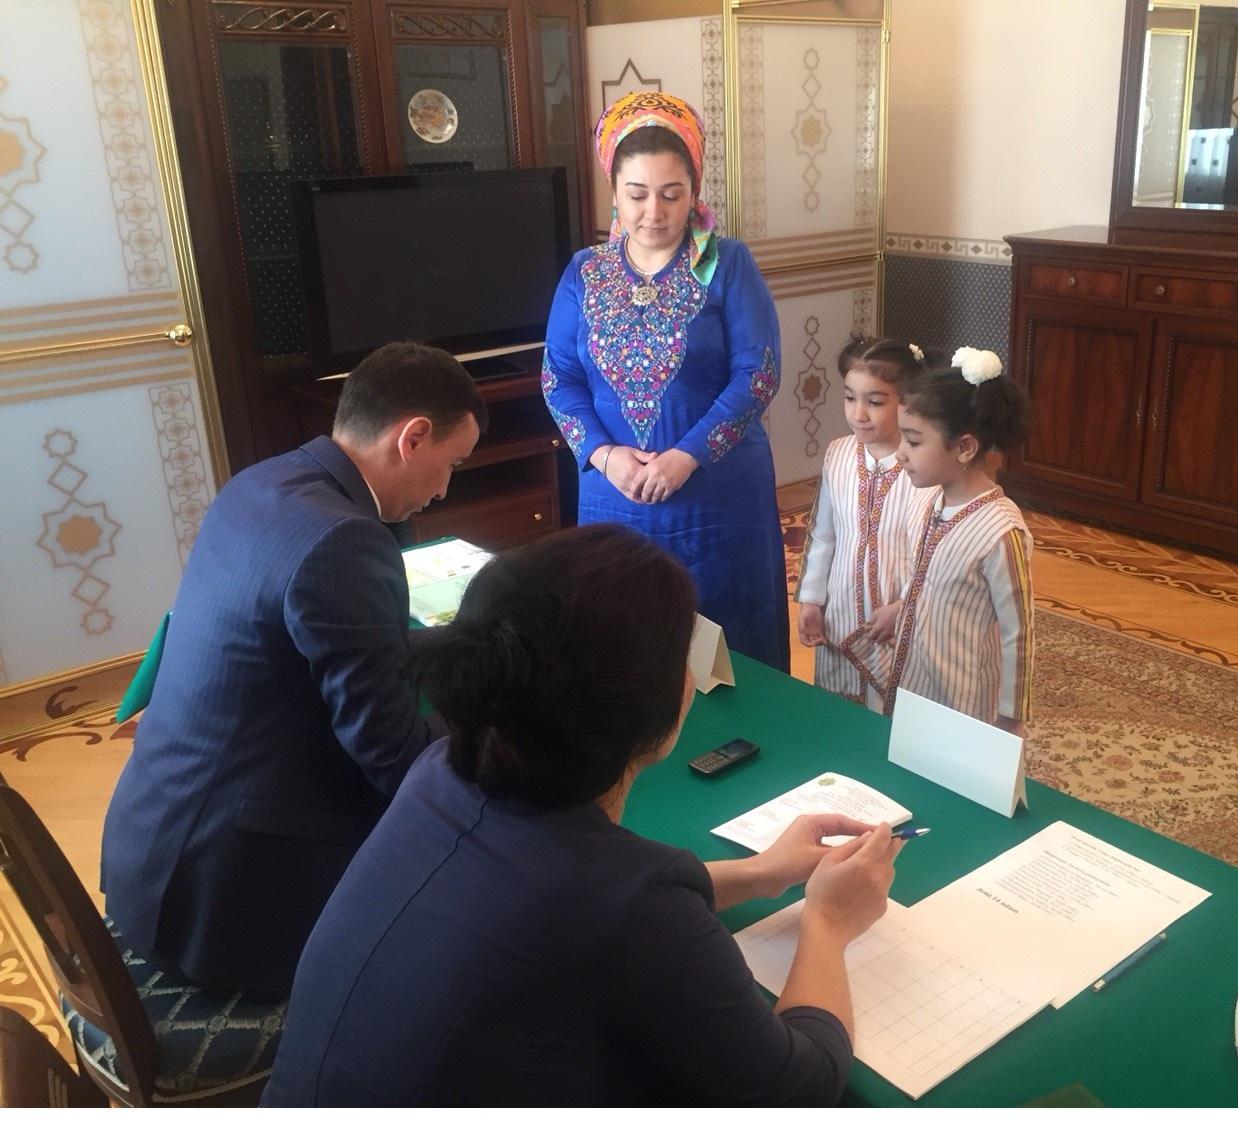 Citizens of Turkmenistan actively voting at polling station in Baku